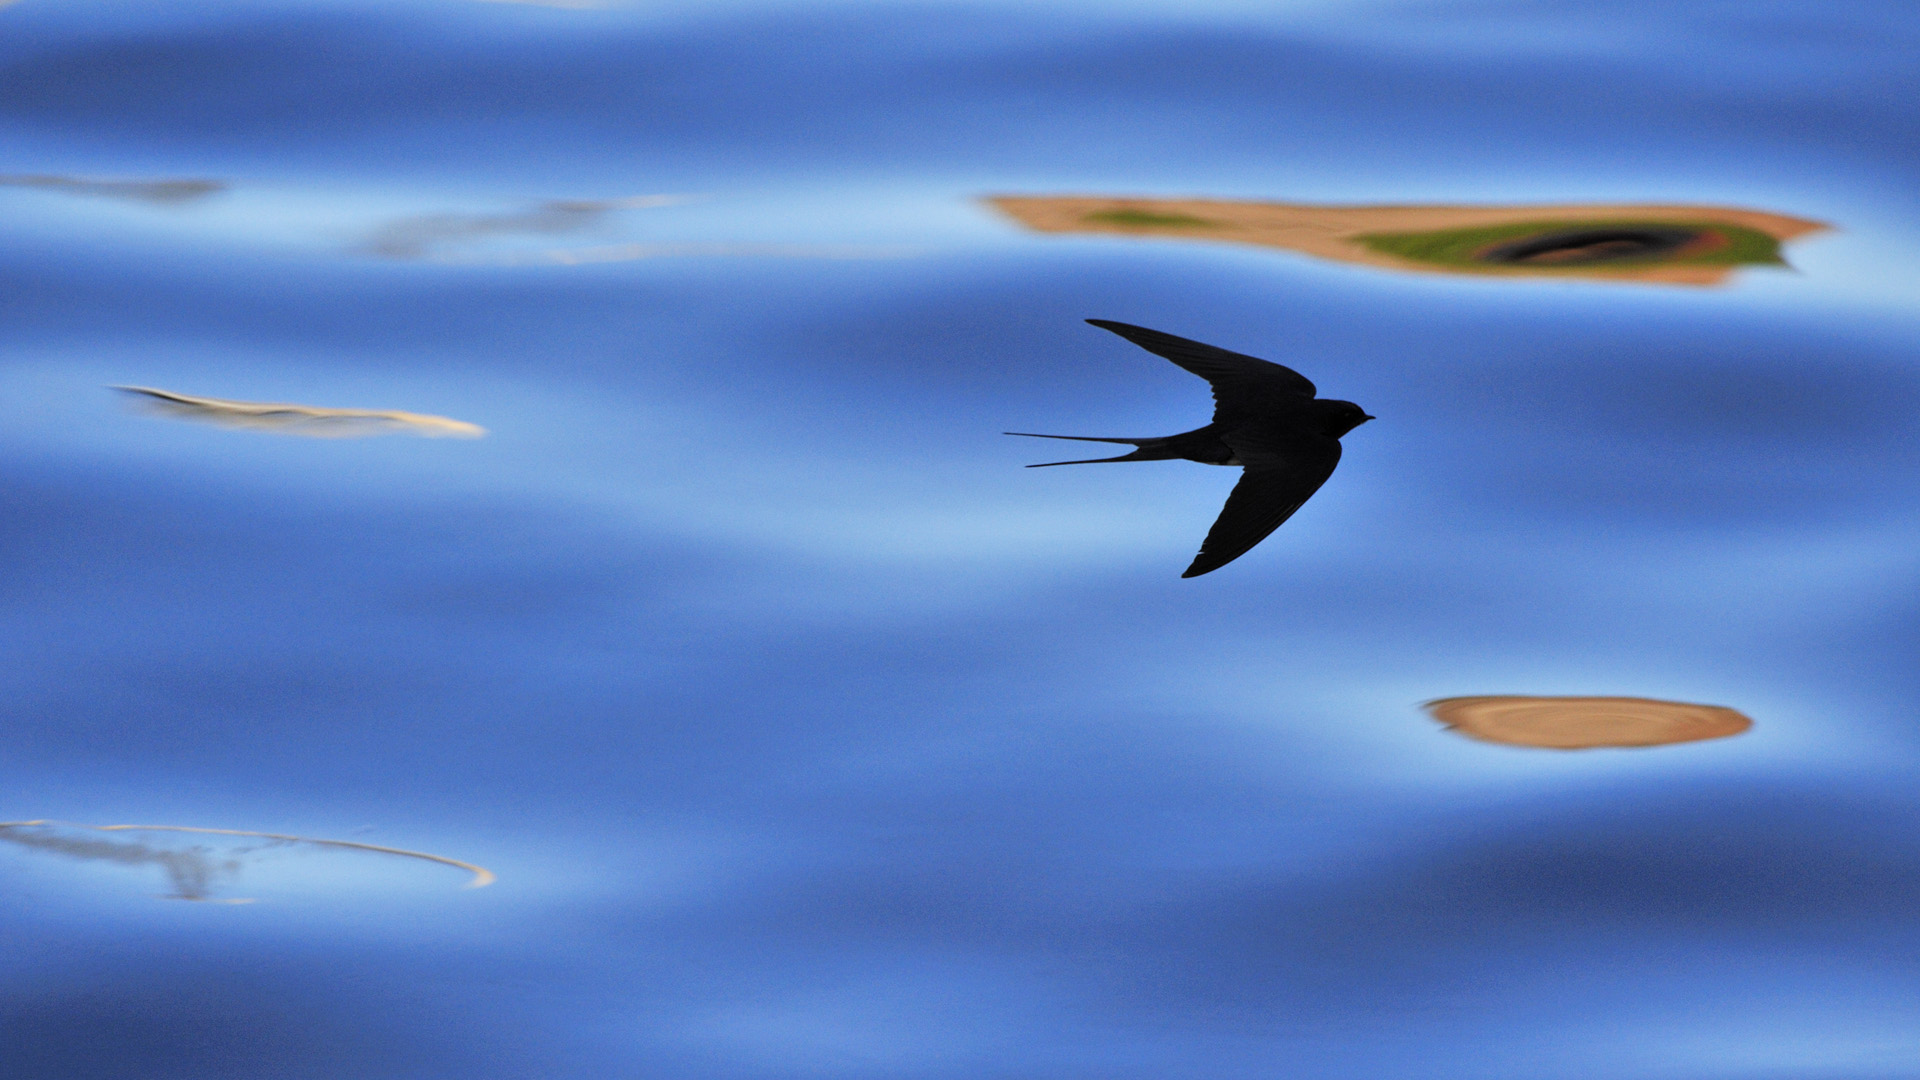 Smart swallow scenery, animals, 1920x1080 HD Wallpaper and FREE